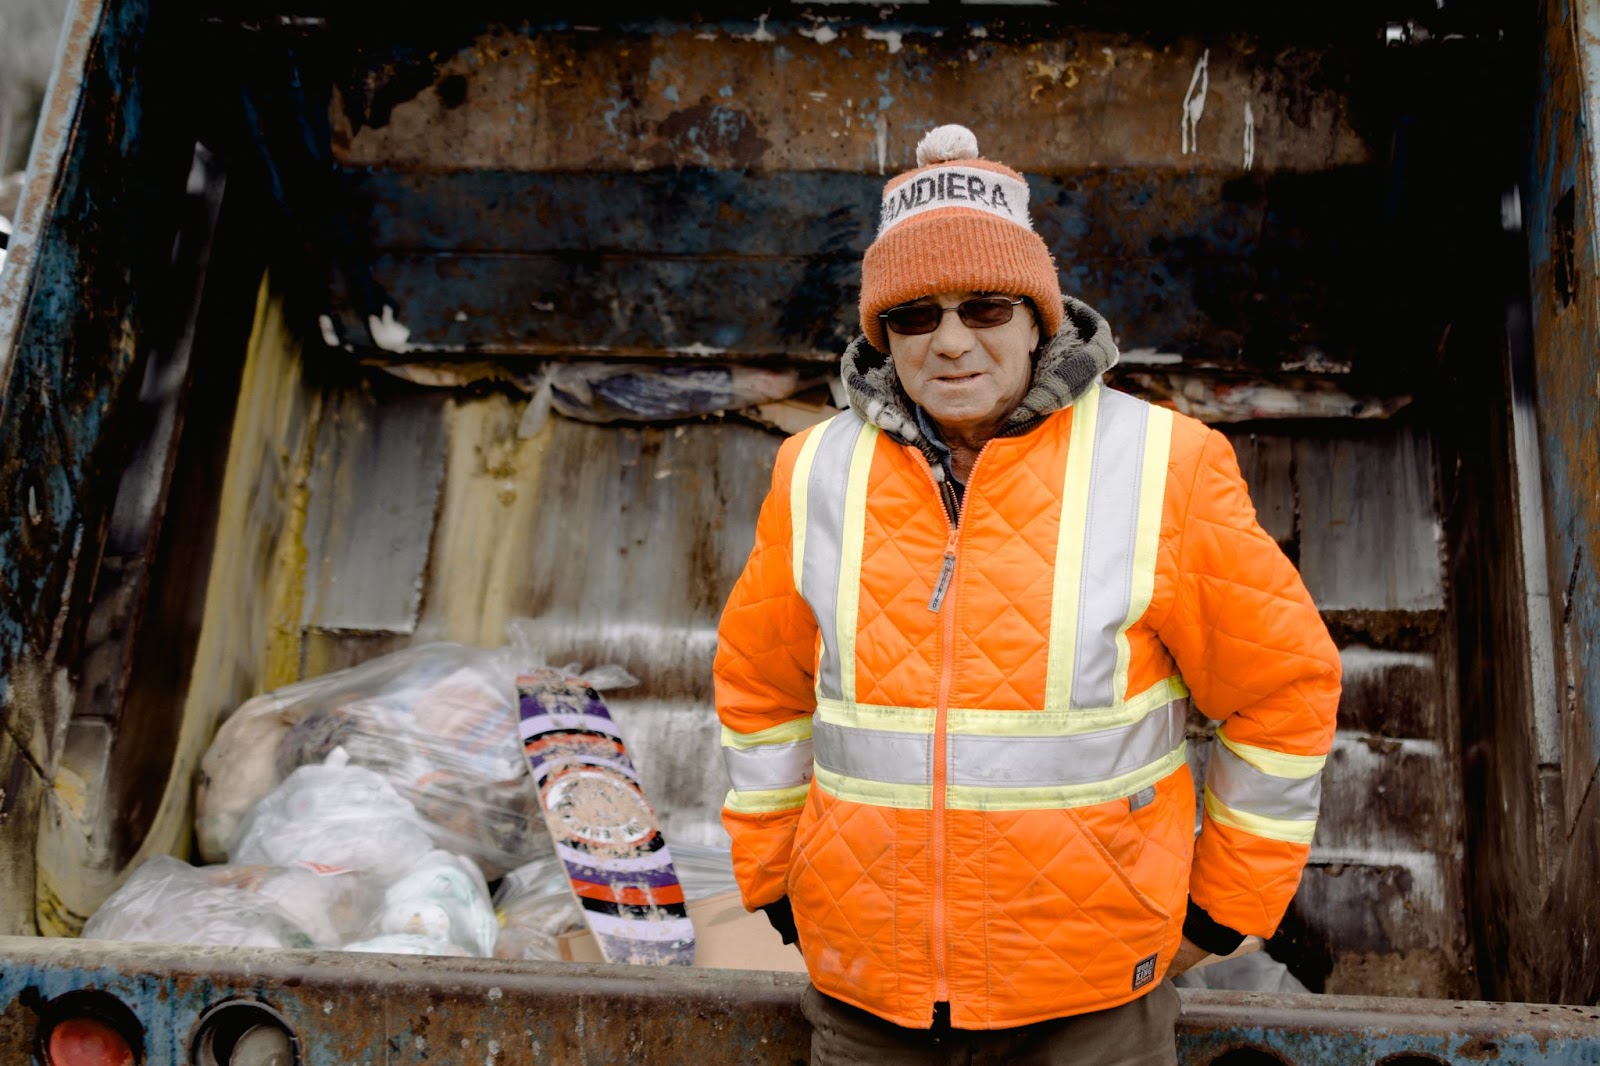 A man wearing fluorescent safety gear in front of a trash truck